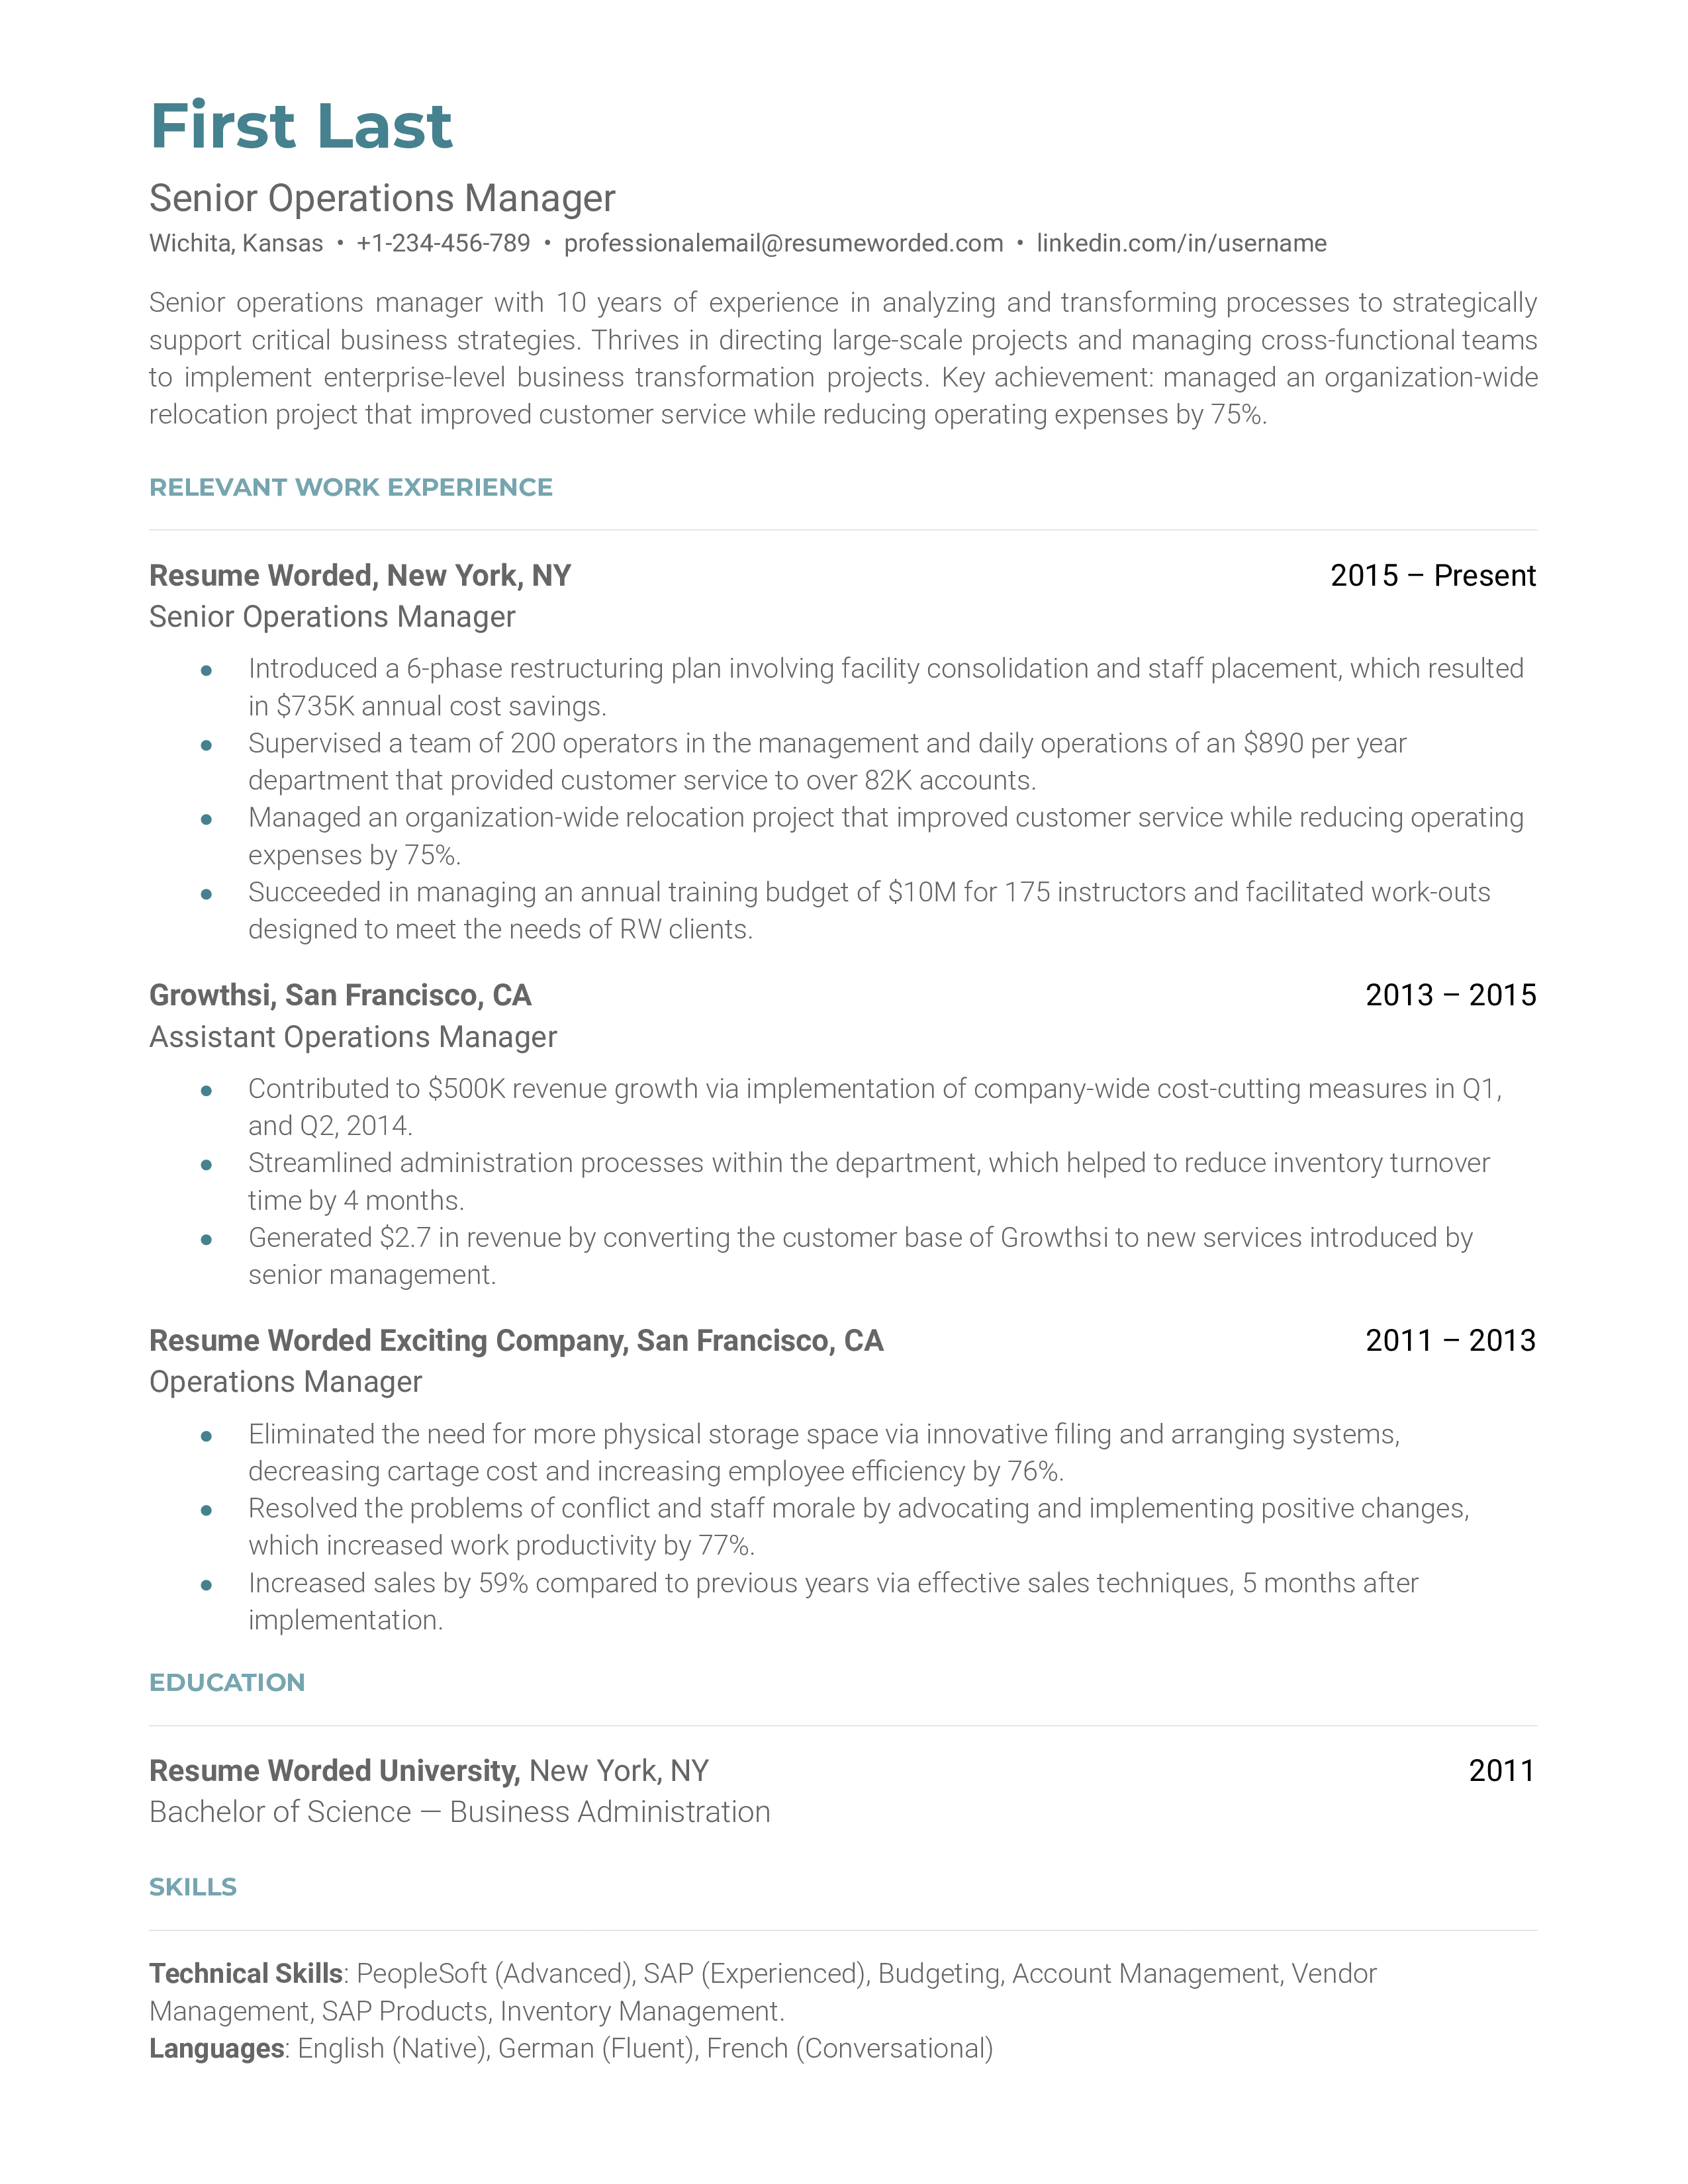 A senior operations manager resume sample highlighting the applicant’s career progression and project management.